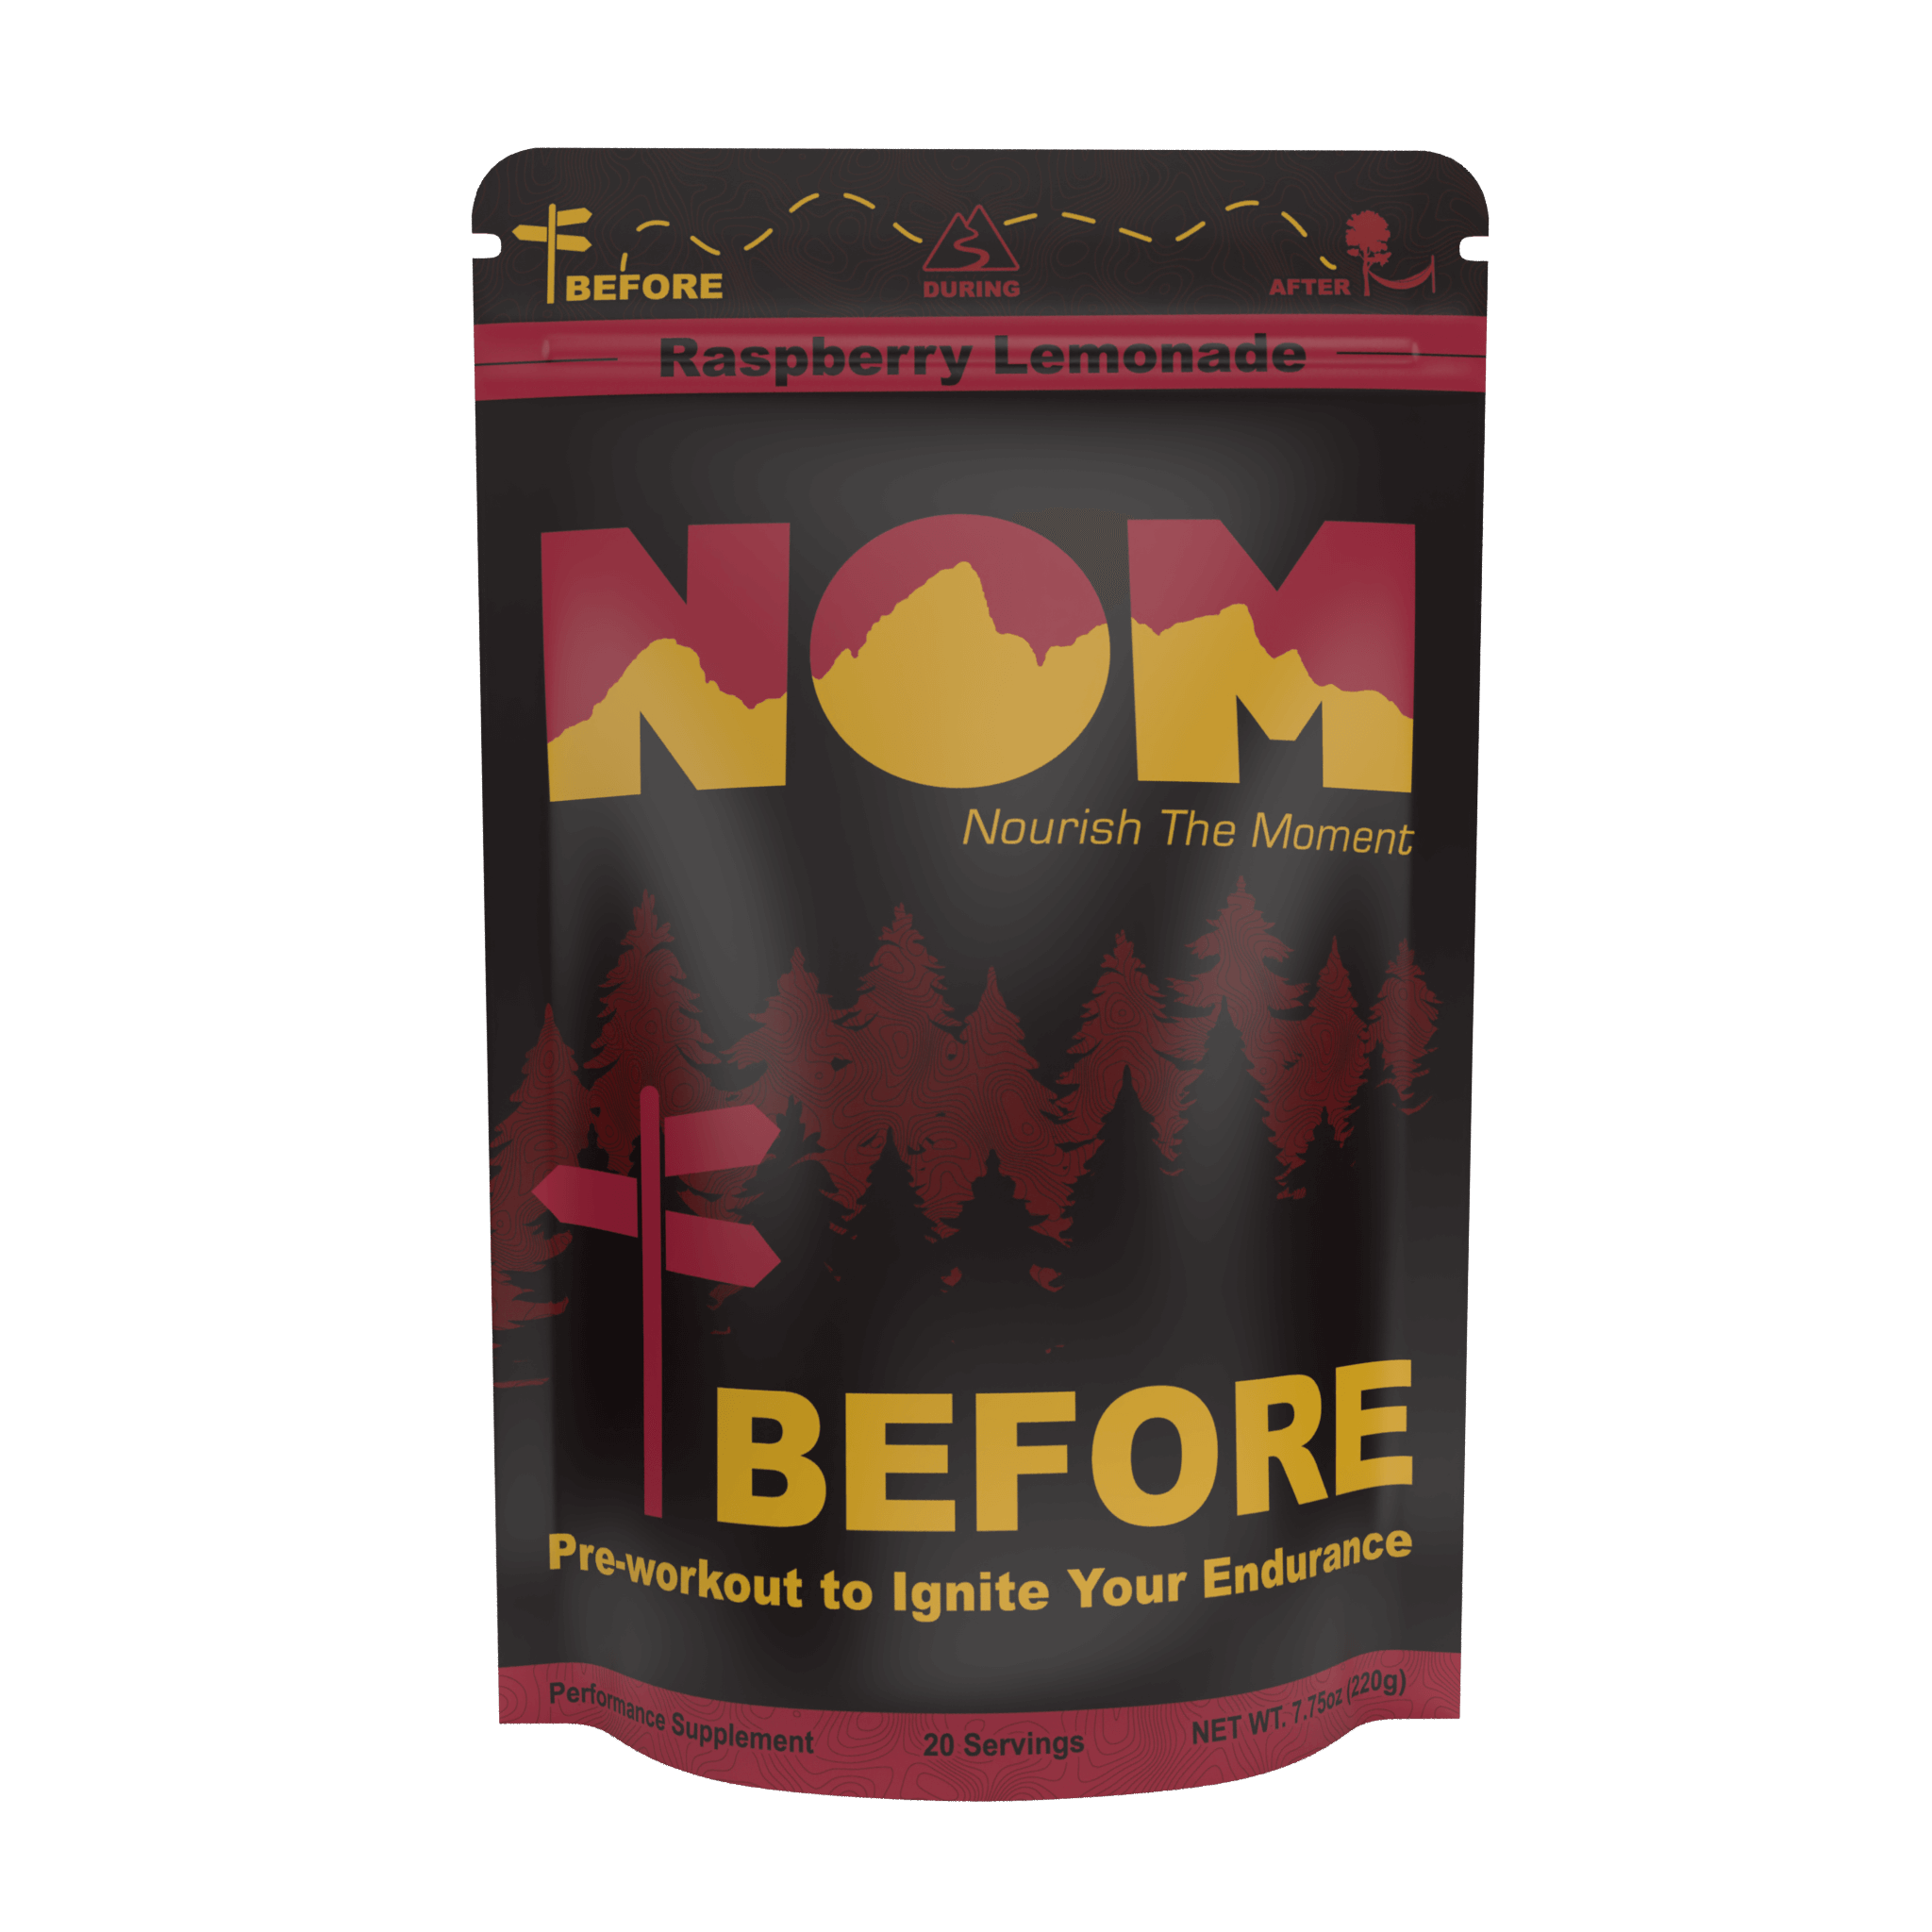 N10s Clean Pre-workout